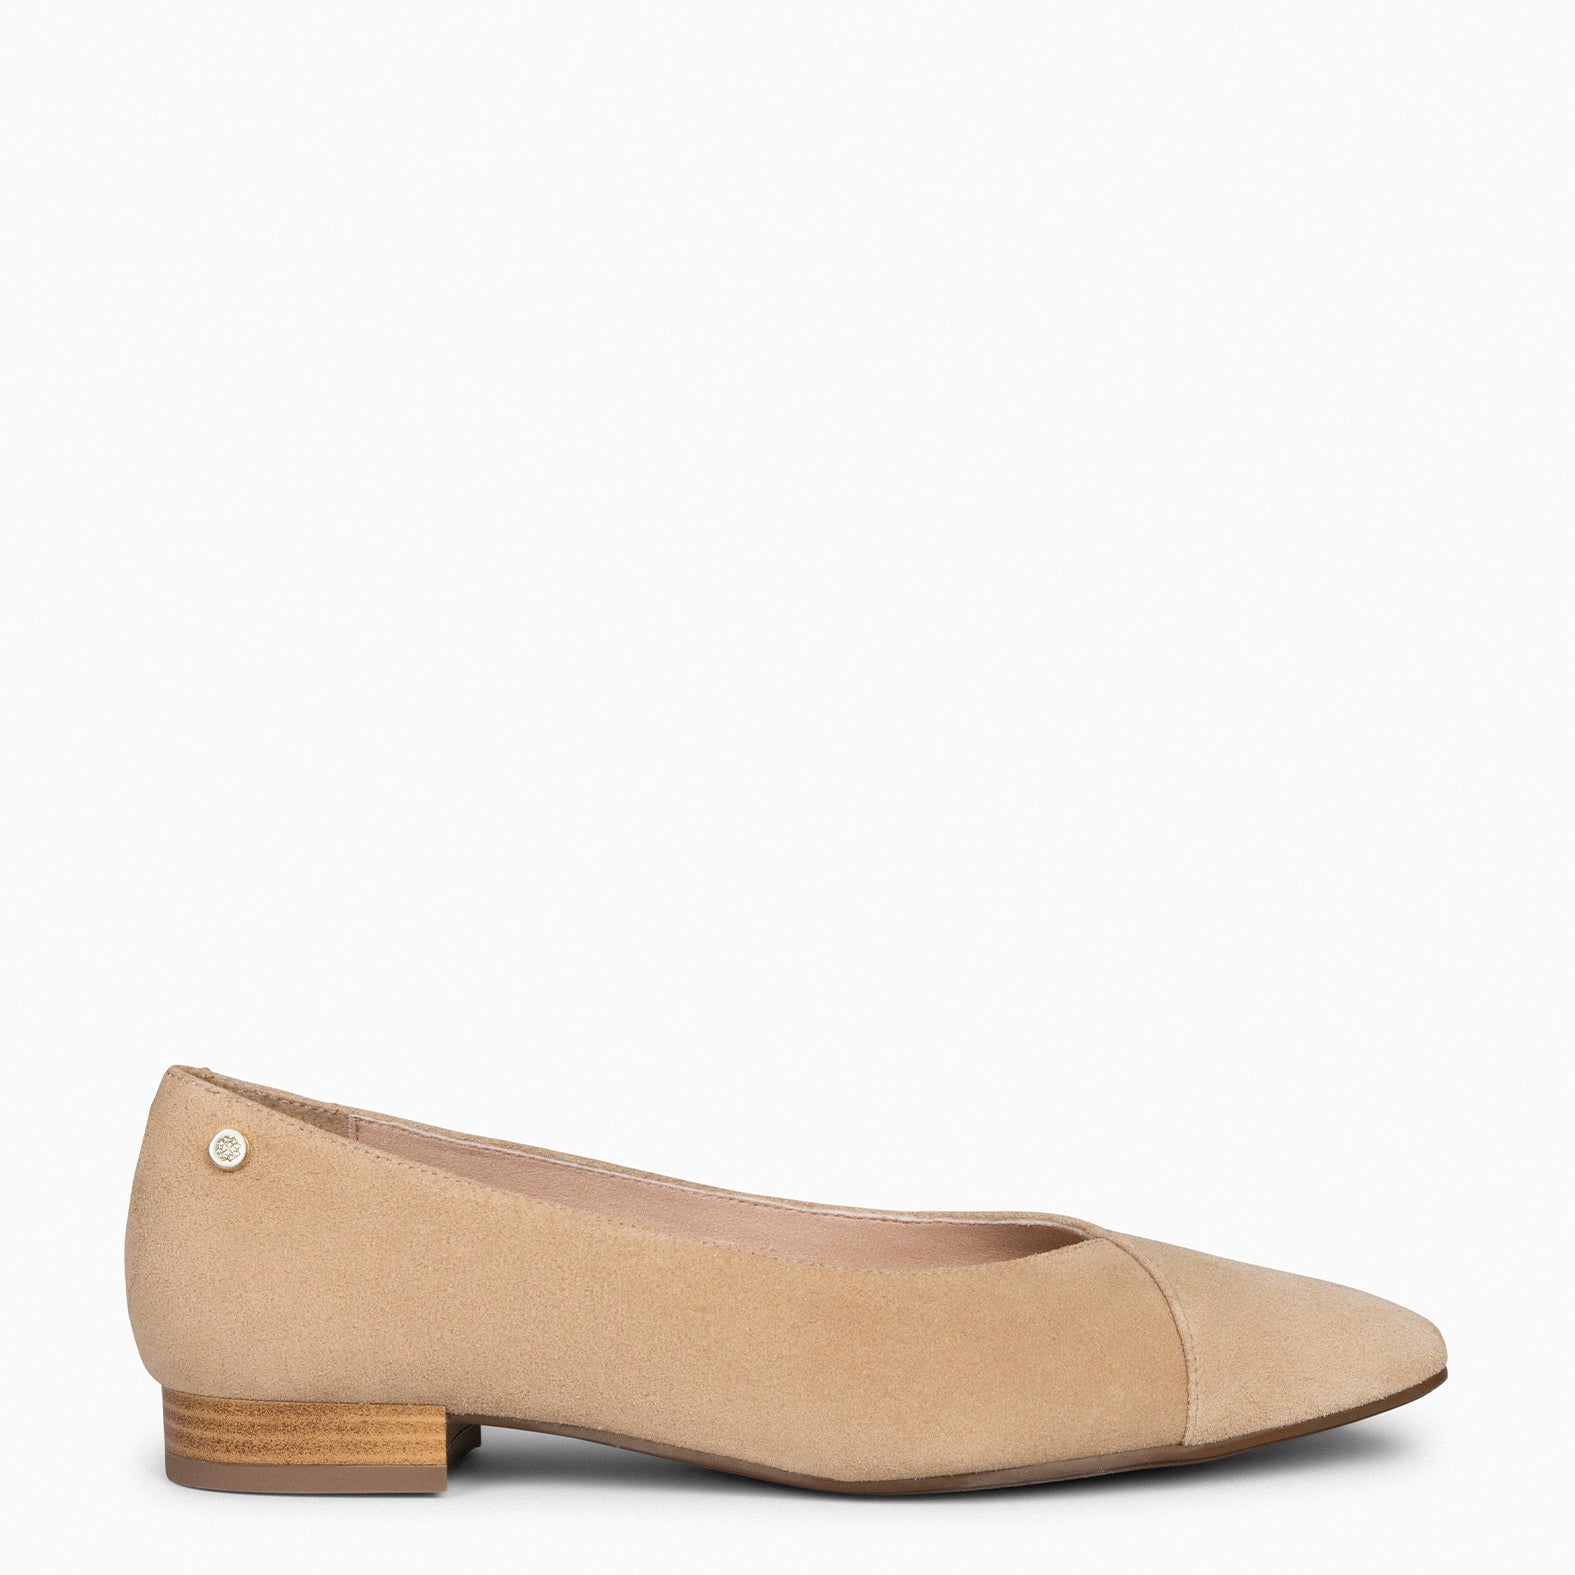 MARIE – TAN pointed flats